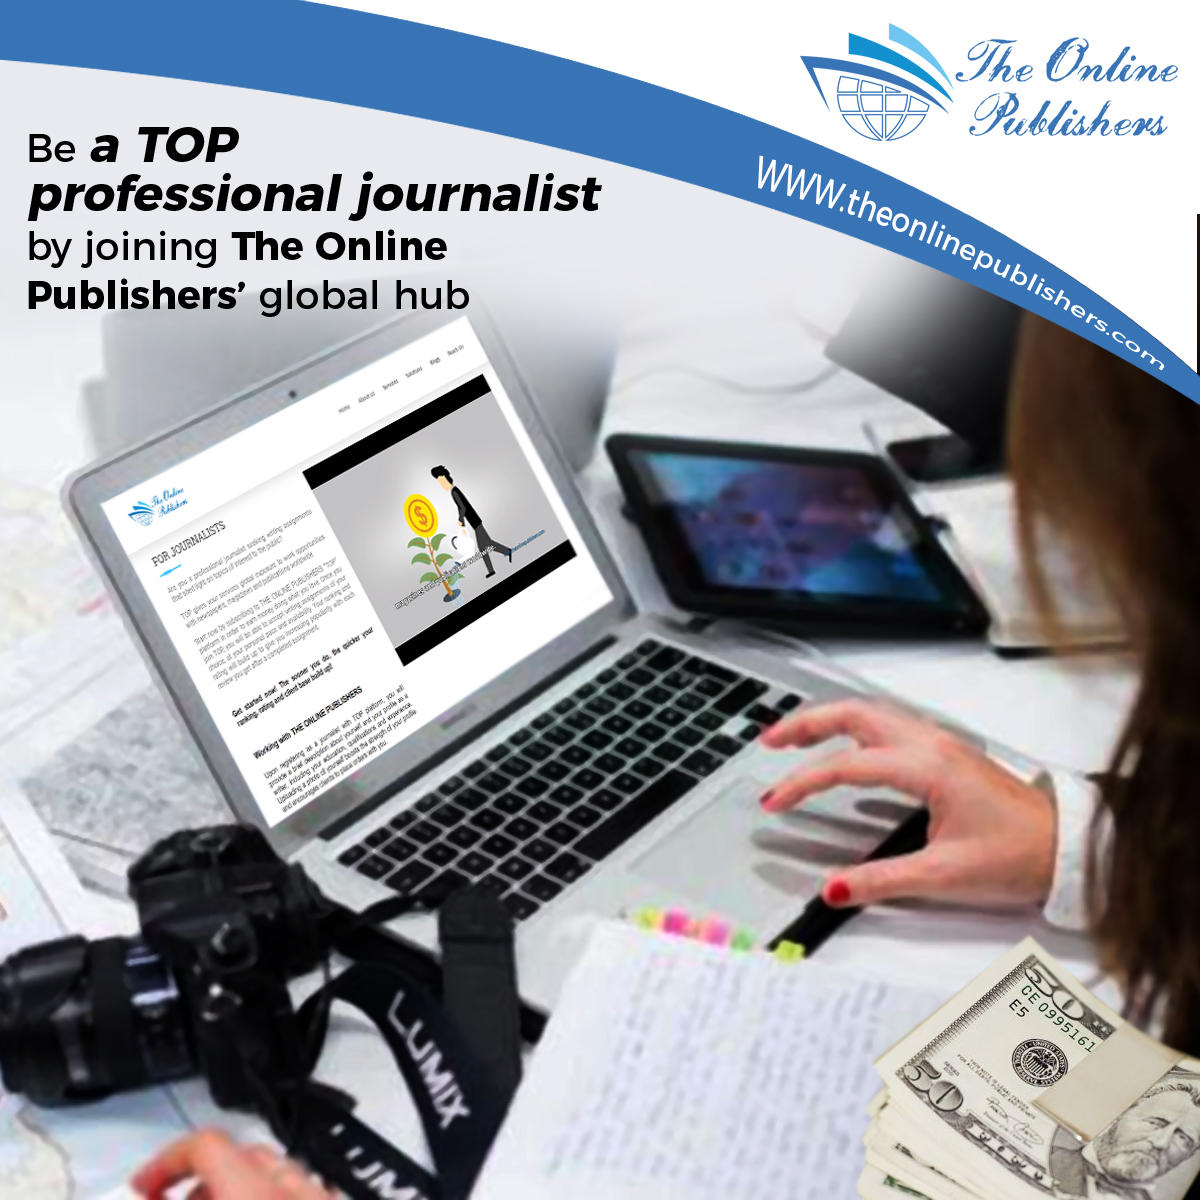 Top 5 Reasons to Become a Freelance Journalist